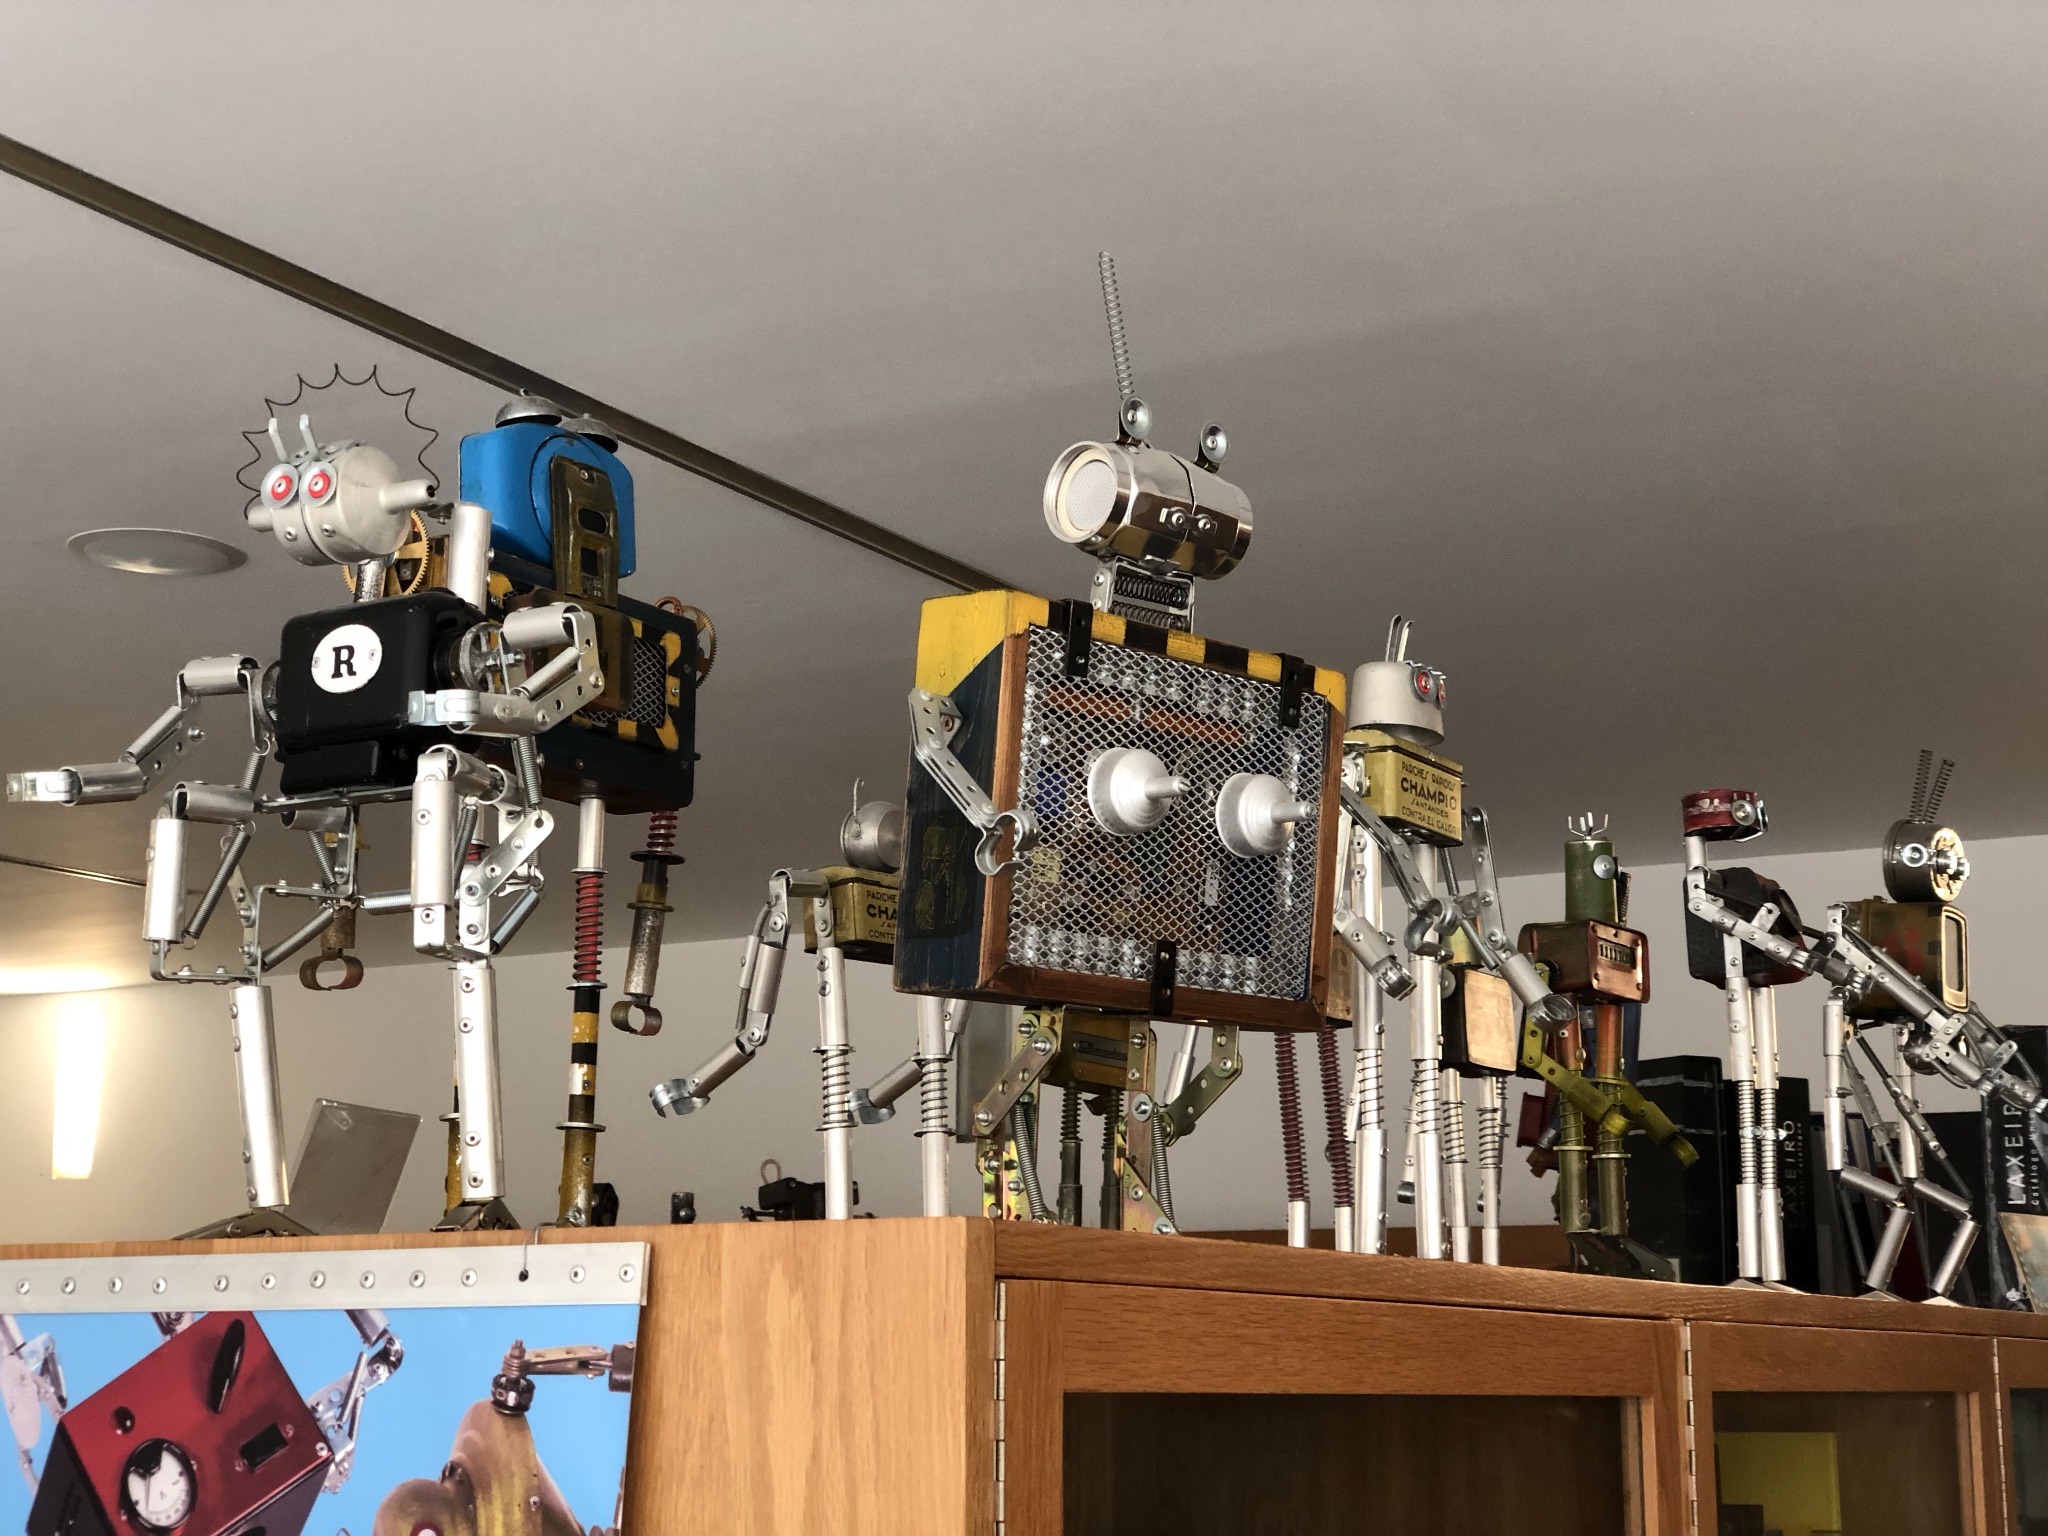 The museum of the galician people was closed, but Sabine and I went to this one. Here a few robots, which you can buy.